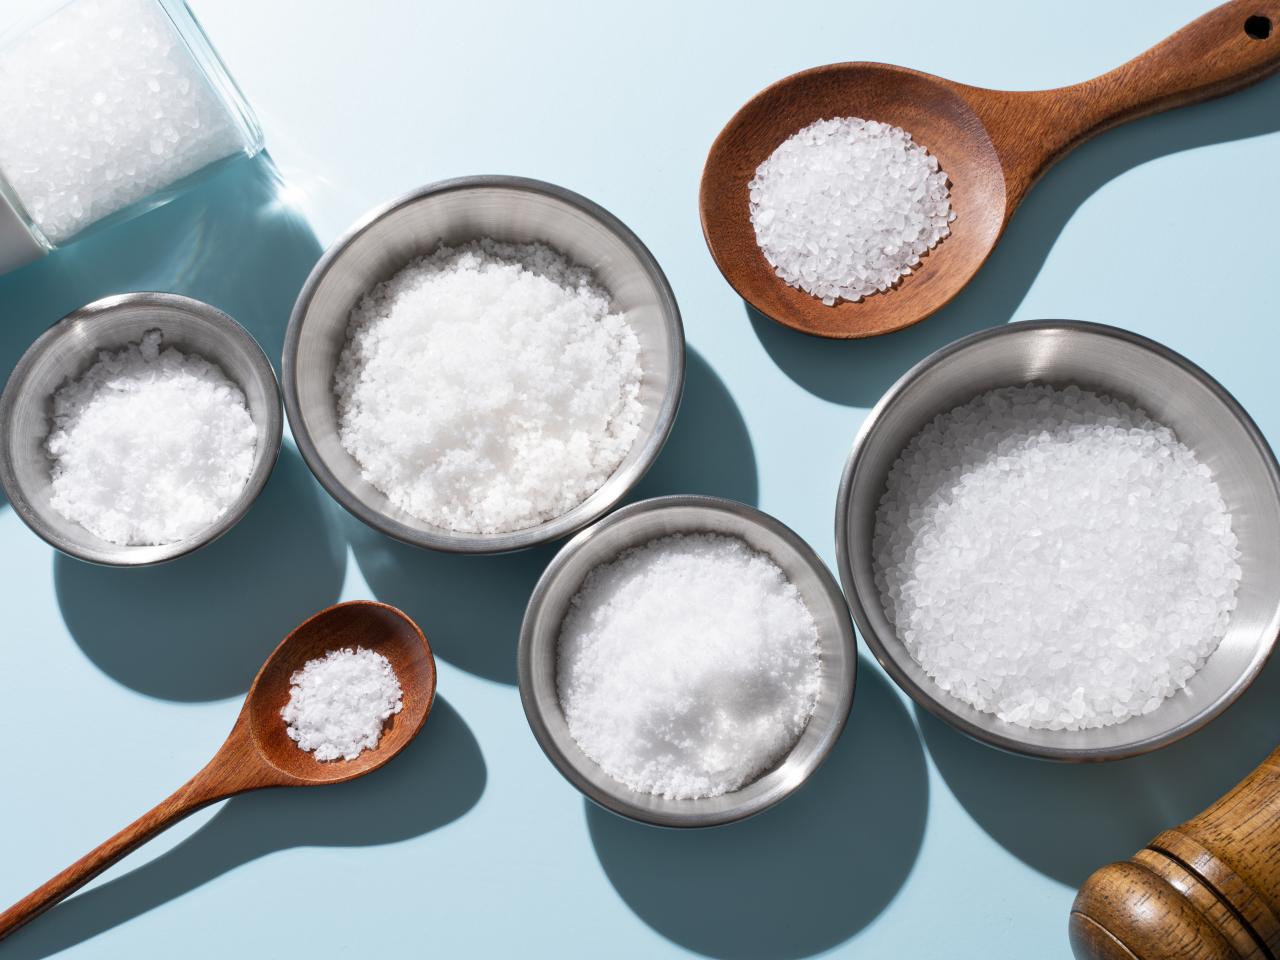 What's A Good Kosher Salt Substitute?